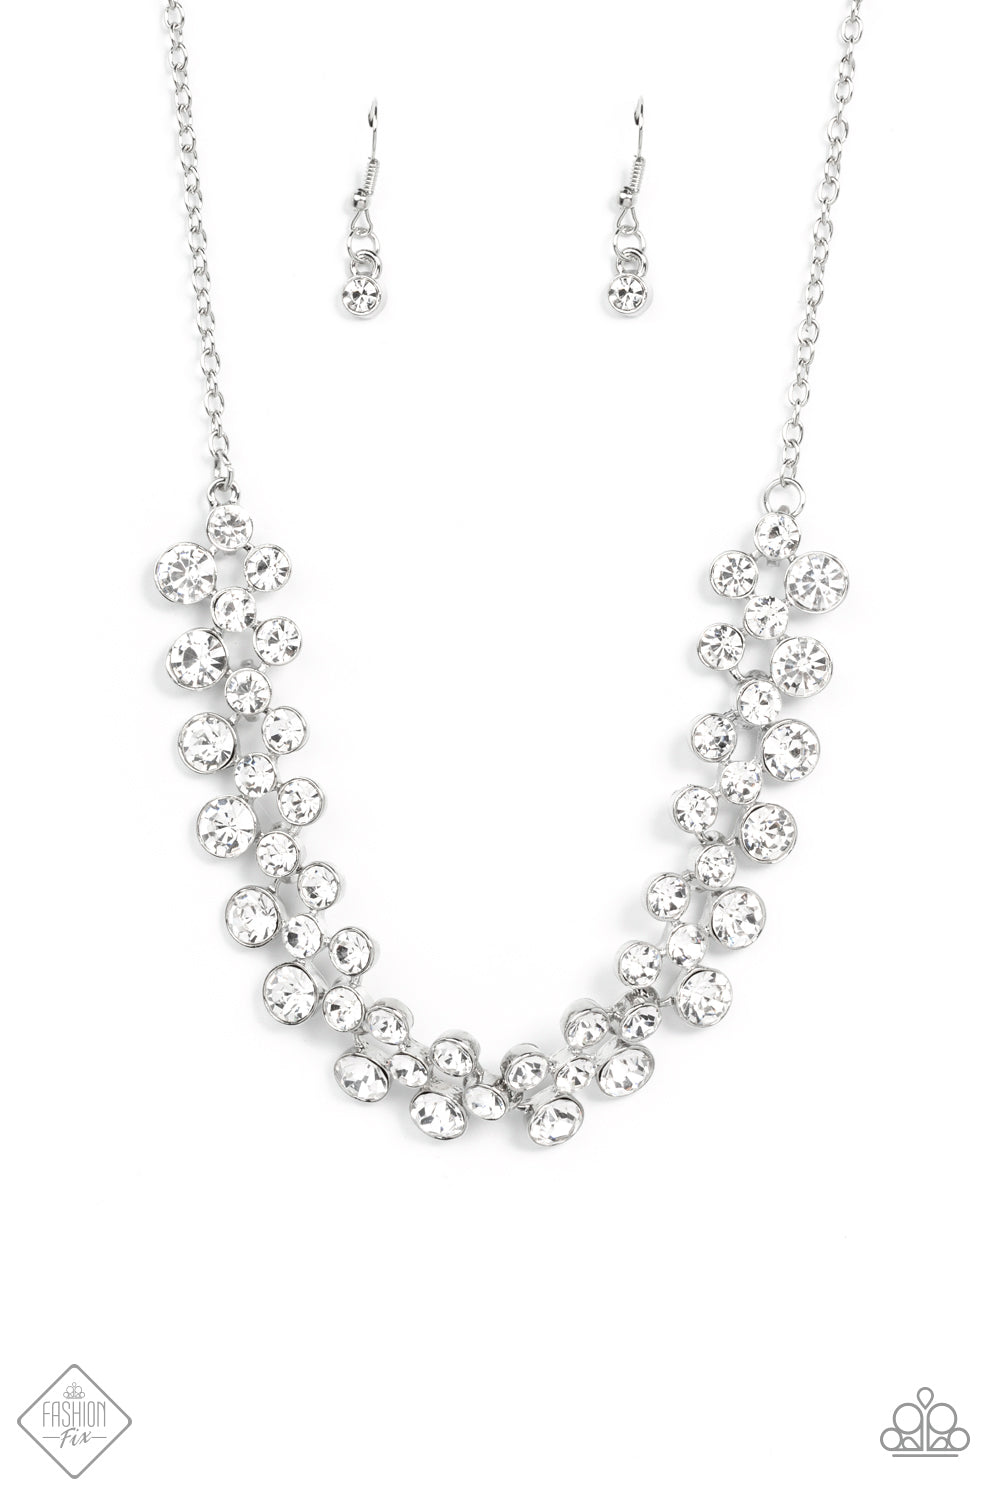 Won the Lottery - White Rhinestone Necklaces layers of brilliant white rhinestones in graduating sizes are encased in simple silver frames as they fall from a classic silver chain and delicately link across the collar, creating a dramatic display of swoon-worthy sparkle. Features an adjustable clasp closure.  Sold as one individual necklace. Includes one pair of matching earrings.